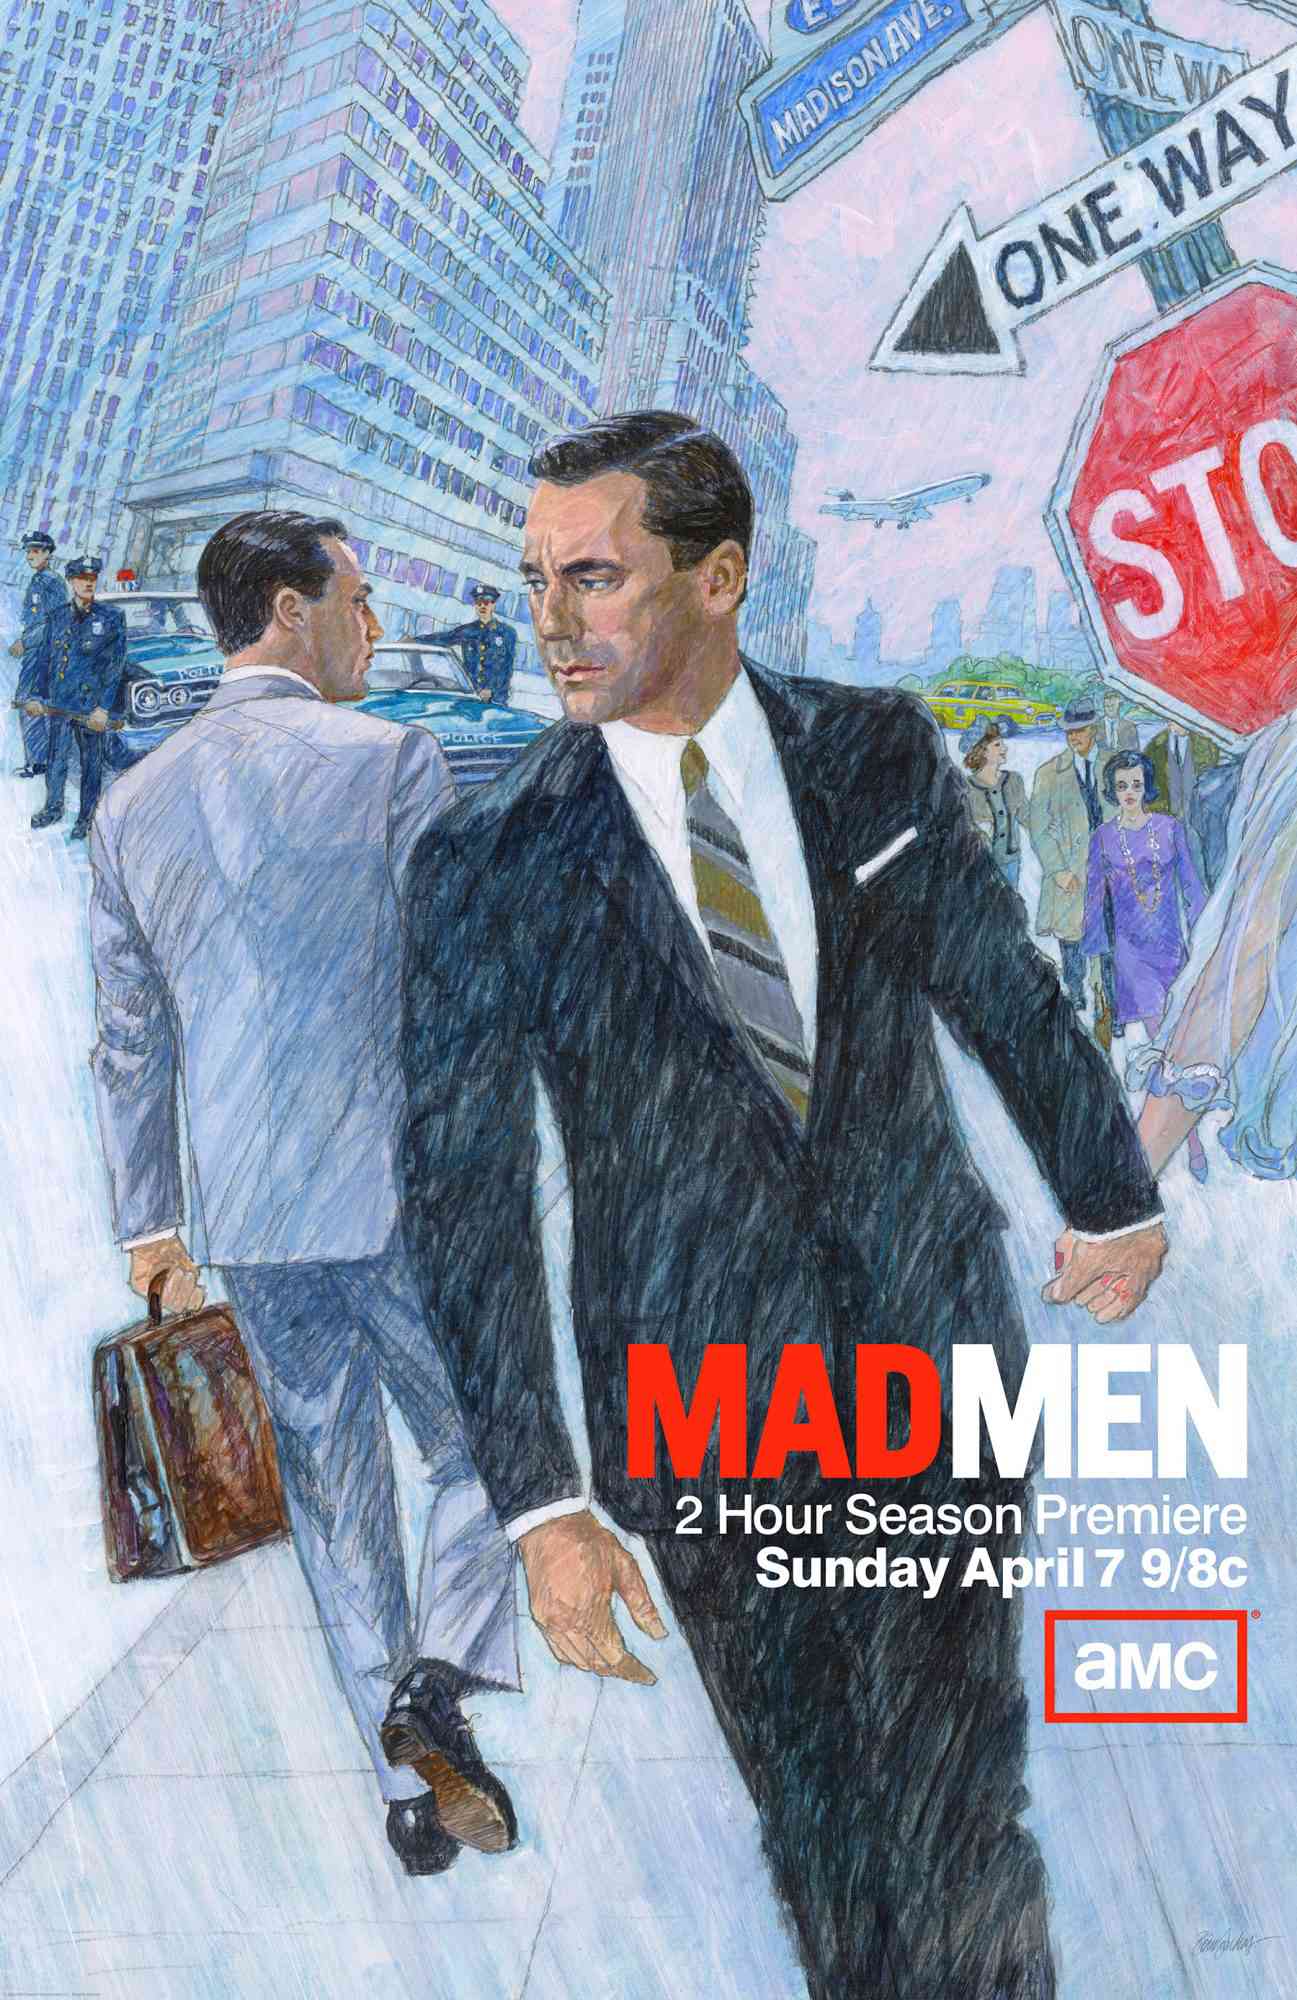 Mad Men posters, original and imagined